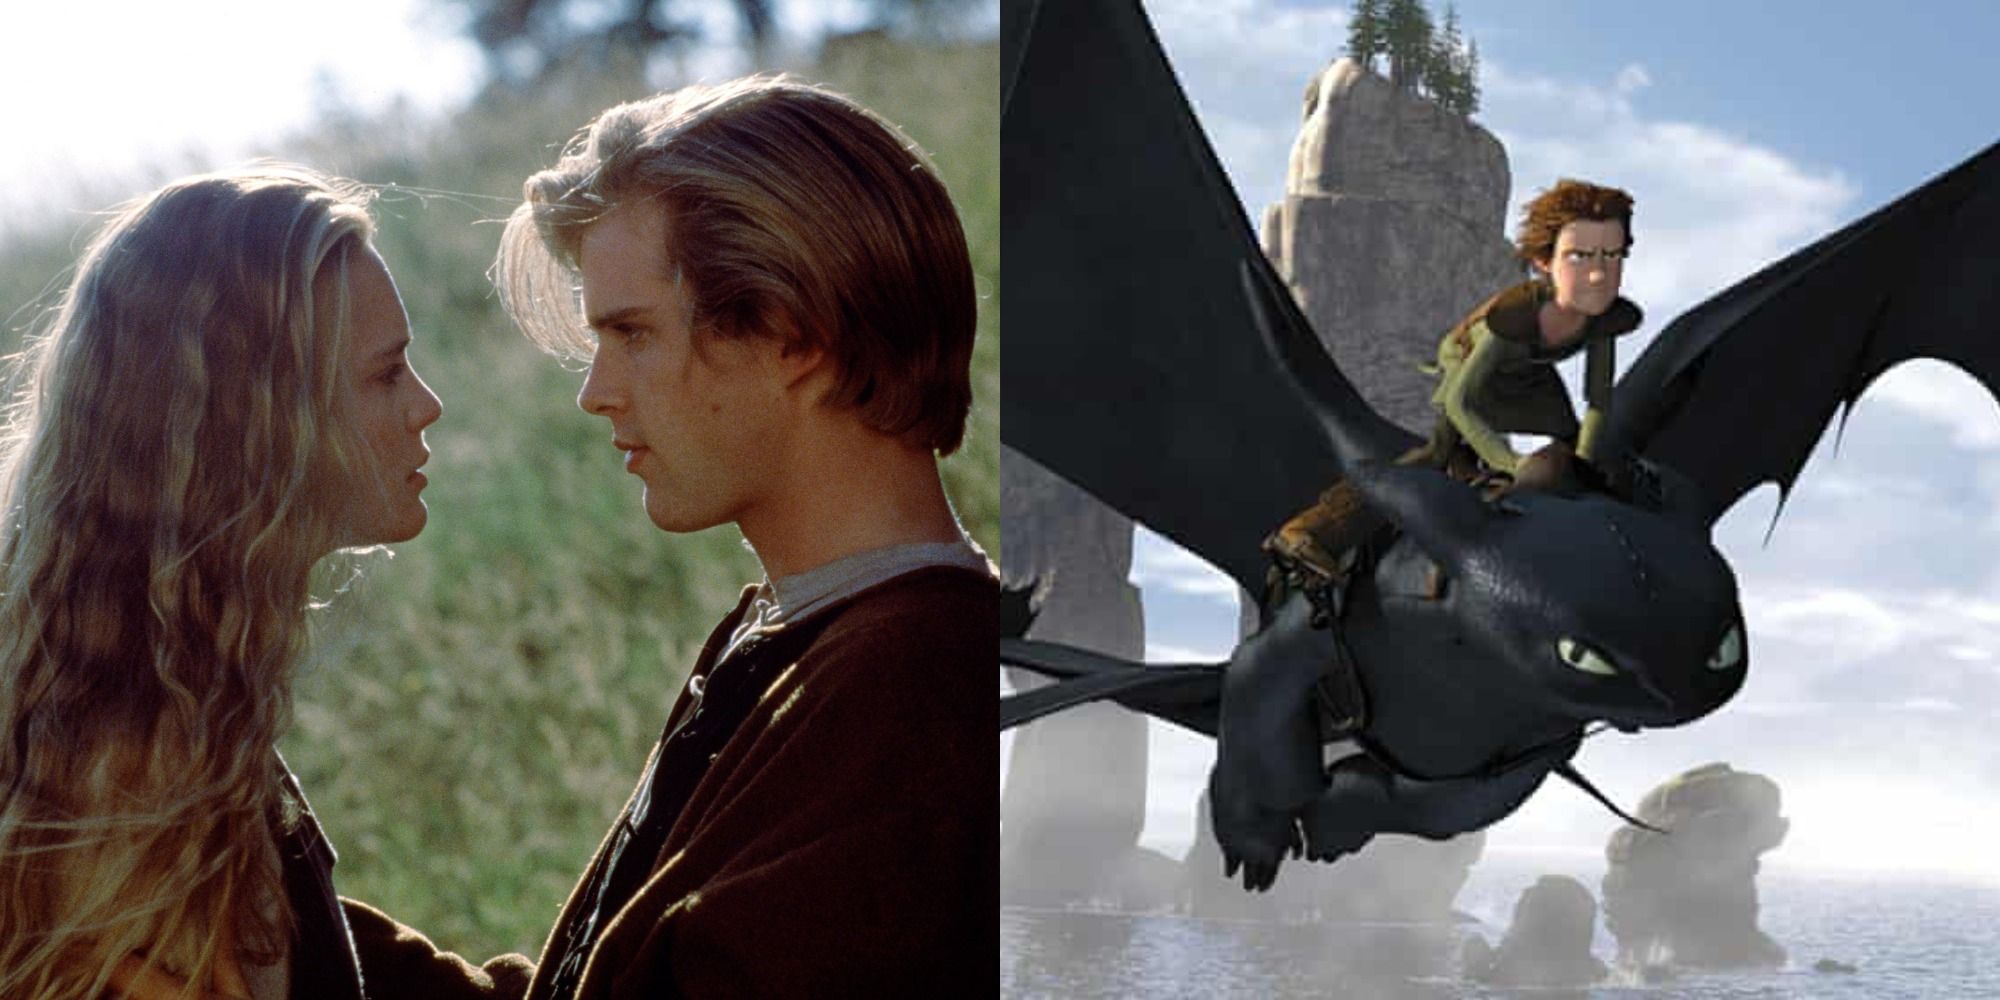 Two side by side images from The Princess Bride and How To Train Your Dragon